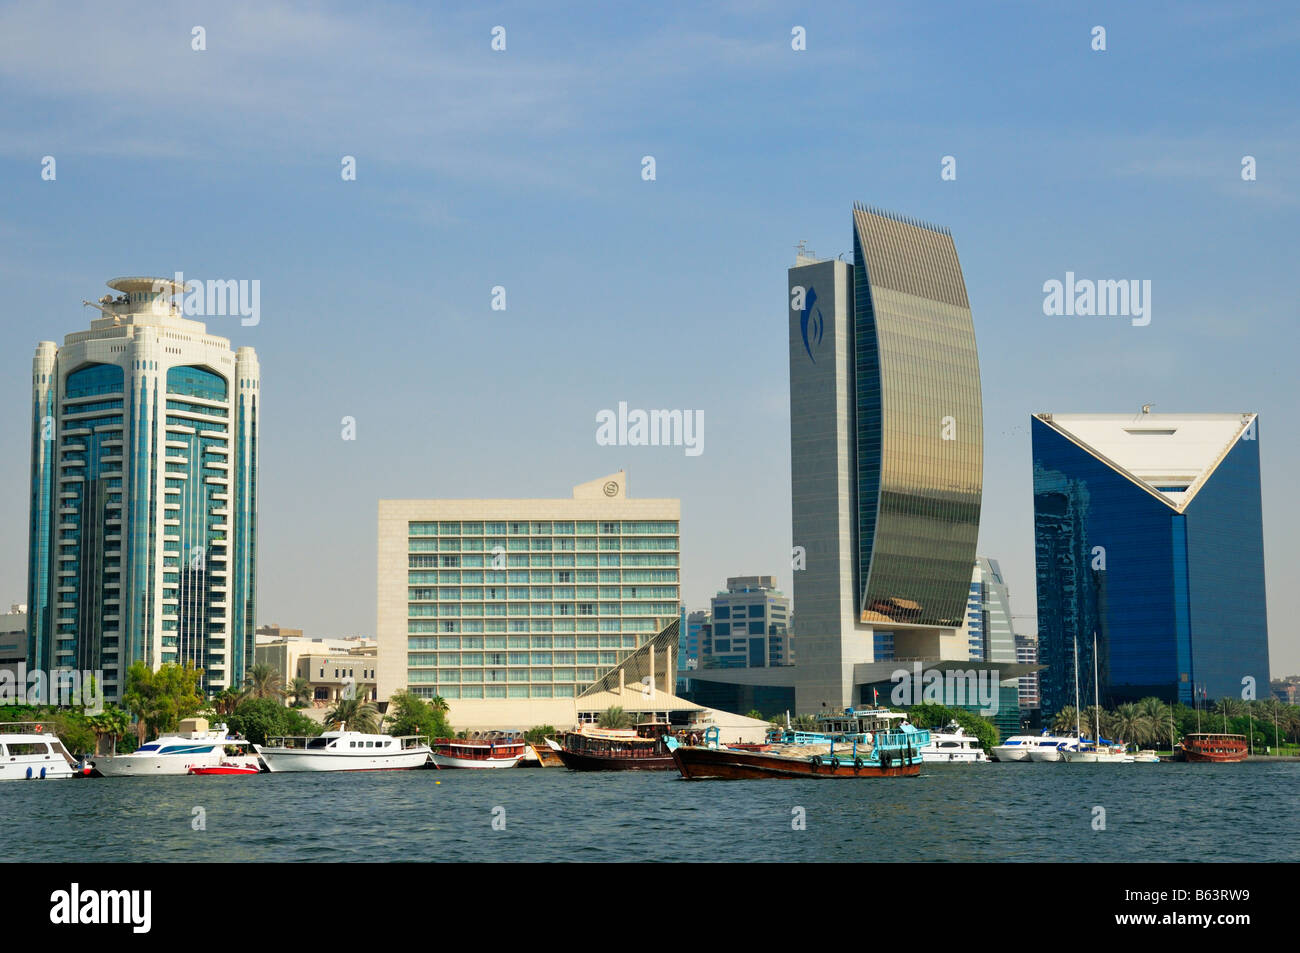 The Sheraton, the Emirates National Bank of Dubai, Creek Tower, and The Chamber of Commerce and Industry, Dubai Deira UAE Stock Photo